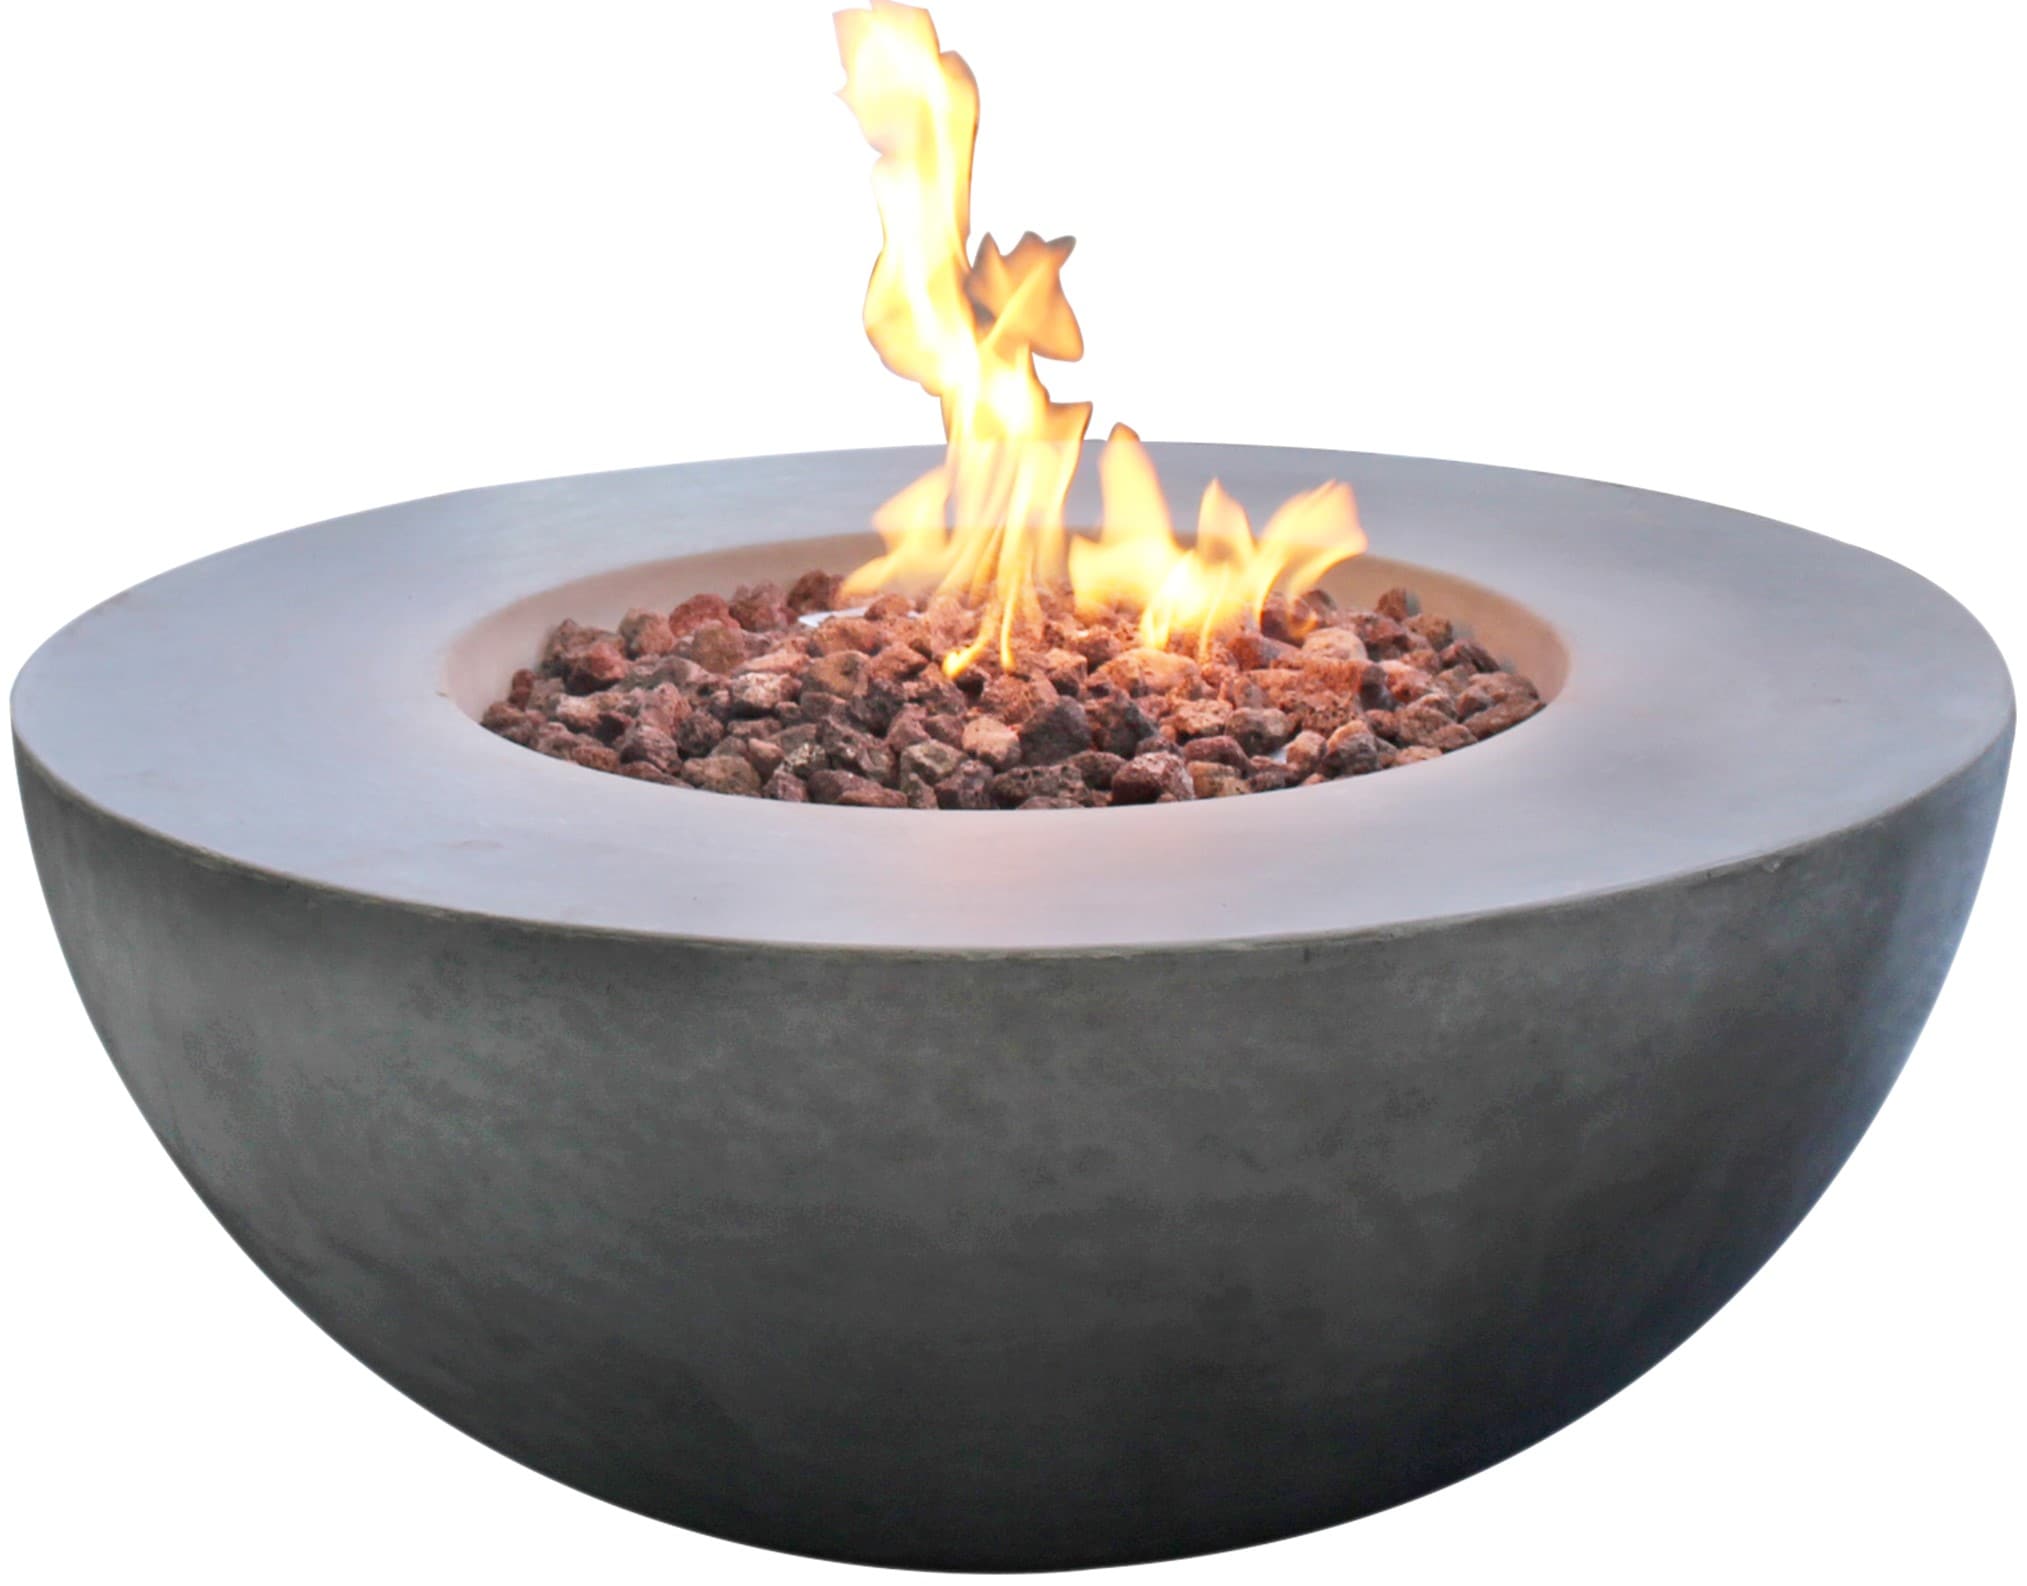 Gas Fire Pits Department At, Can You Convert Any Propane Fire Pit To Natural Gas